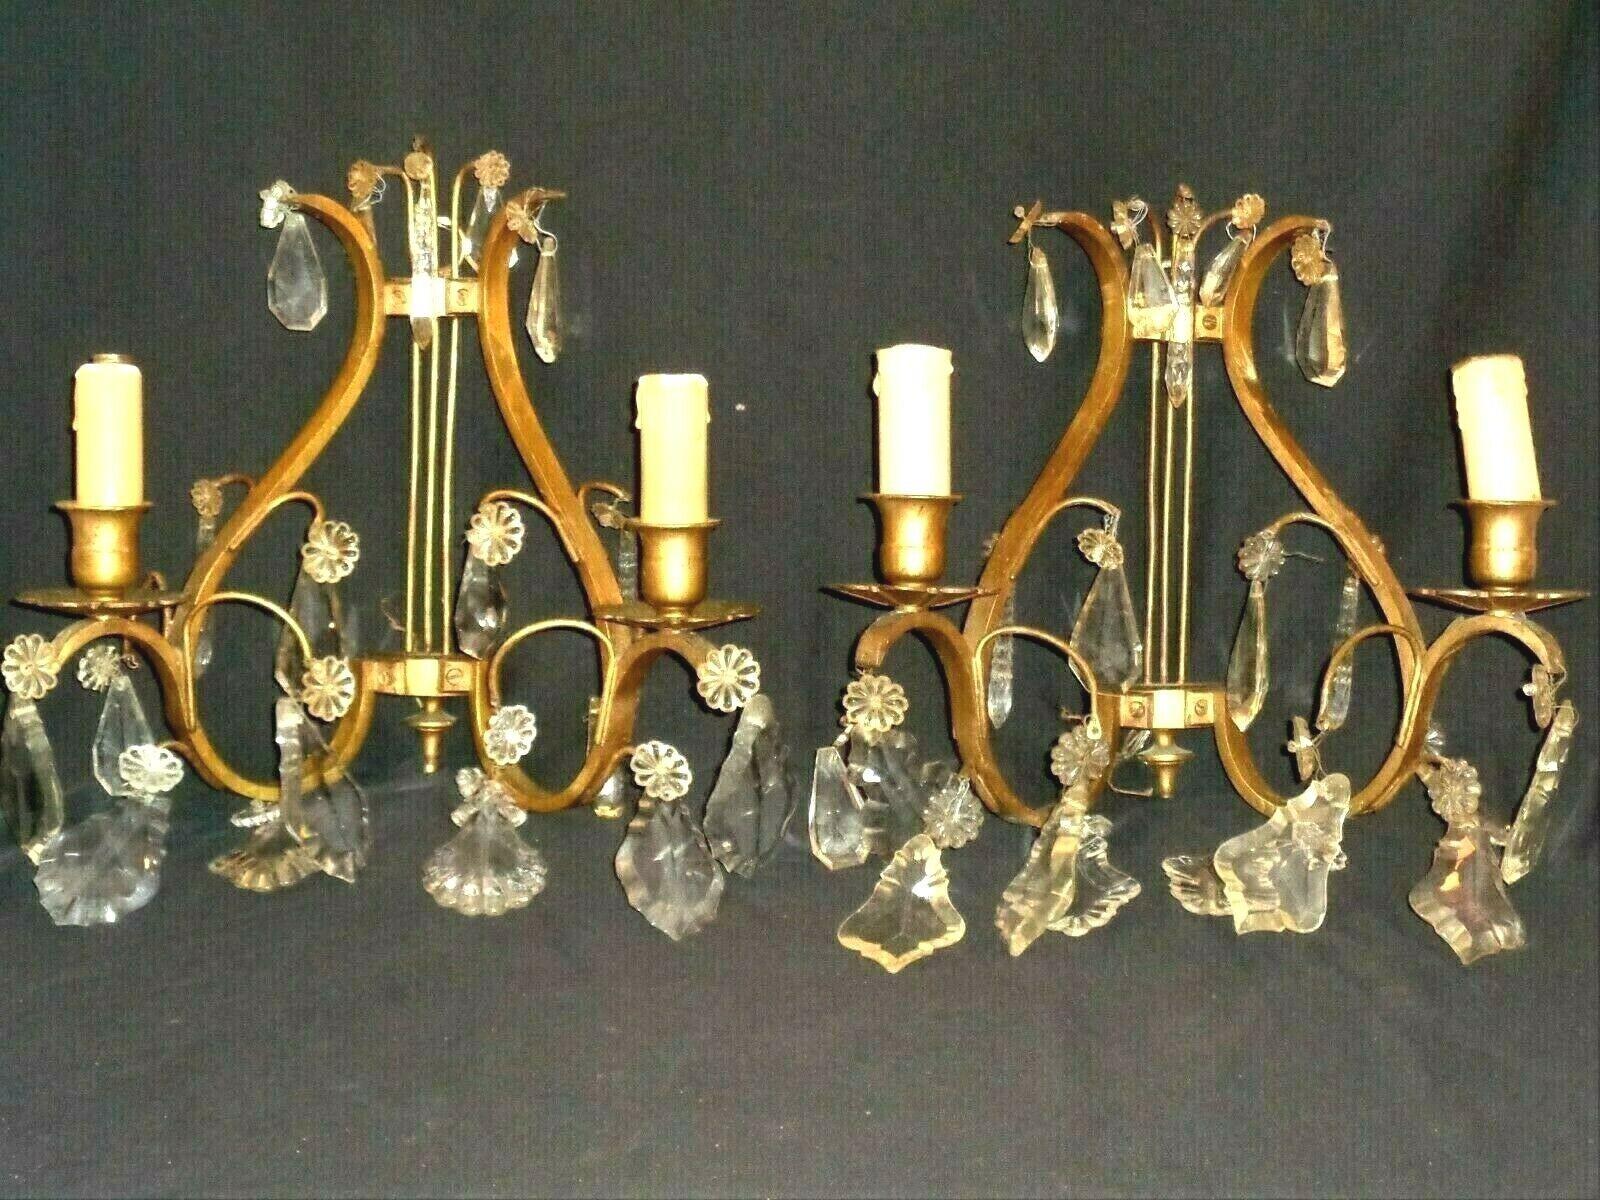 Stunning Pair Of 1920's French Louis XV / Rococo style Bronze Lyre Back Sconces. Cut crystal adorned.